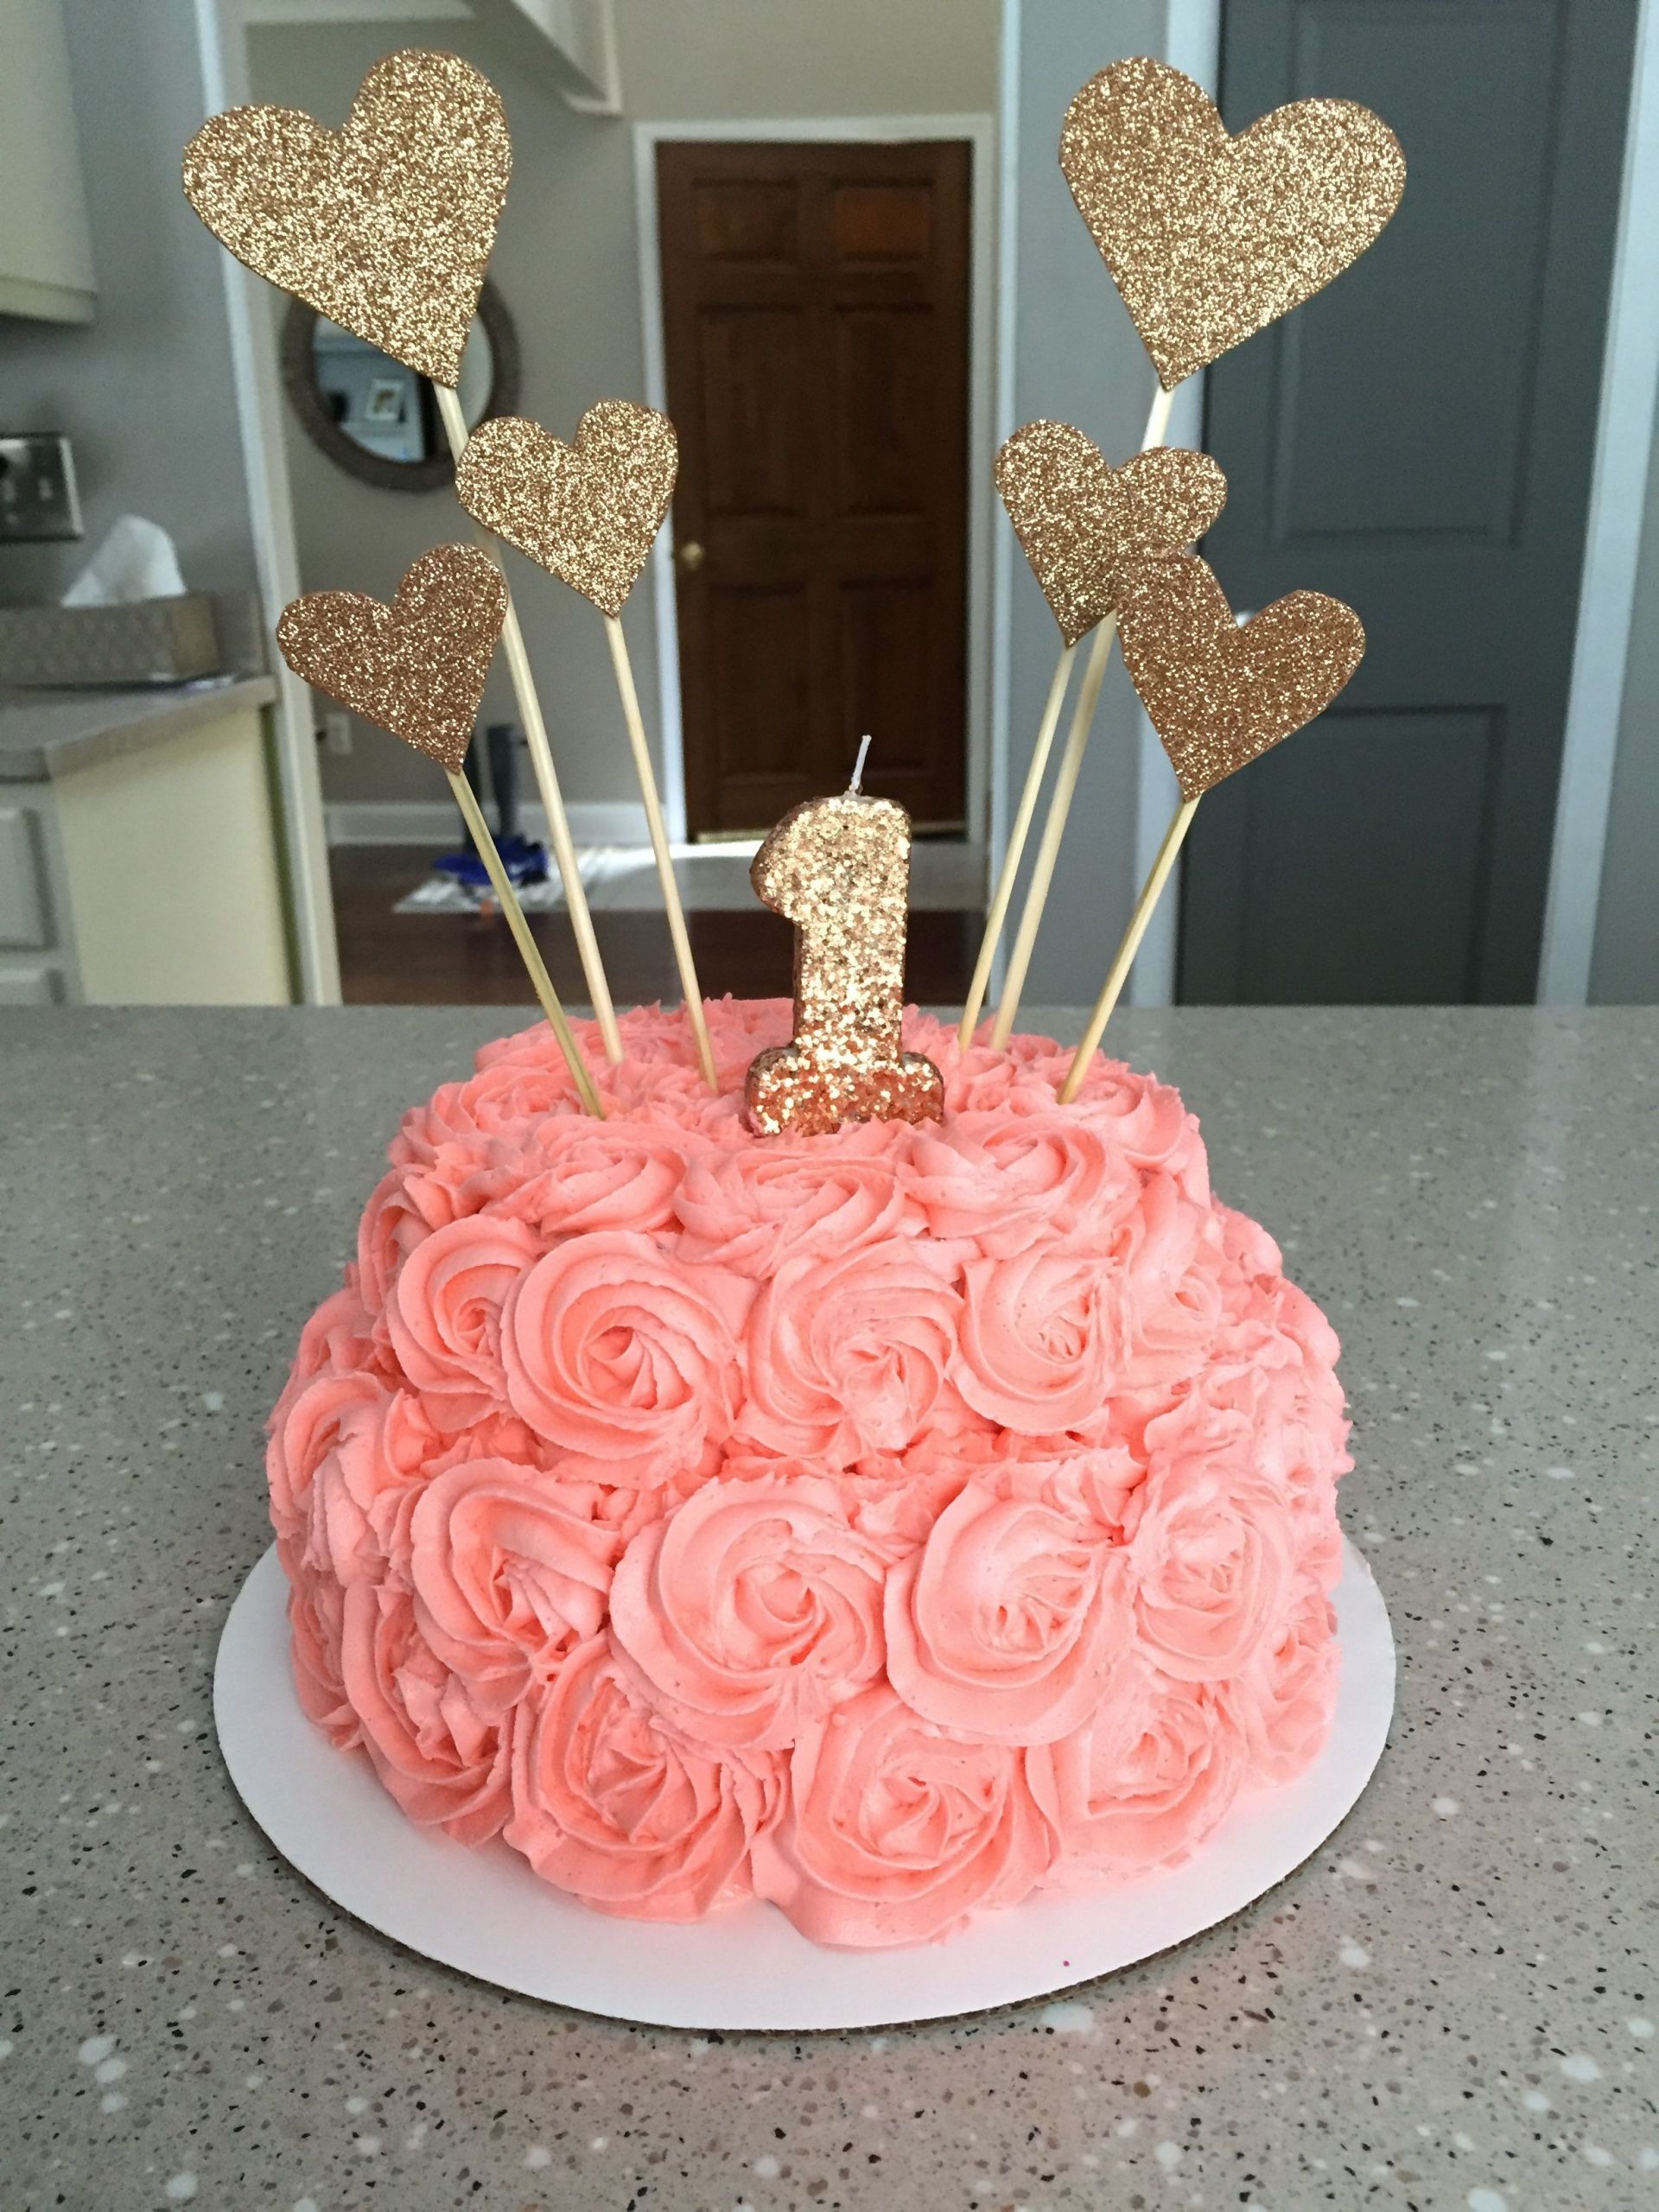 Birthday Cake For 1 Year Old Baby Girl
 First birthday cake Pink and gold decorations on a 1 year